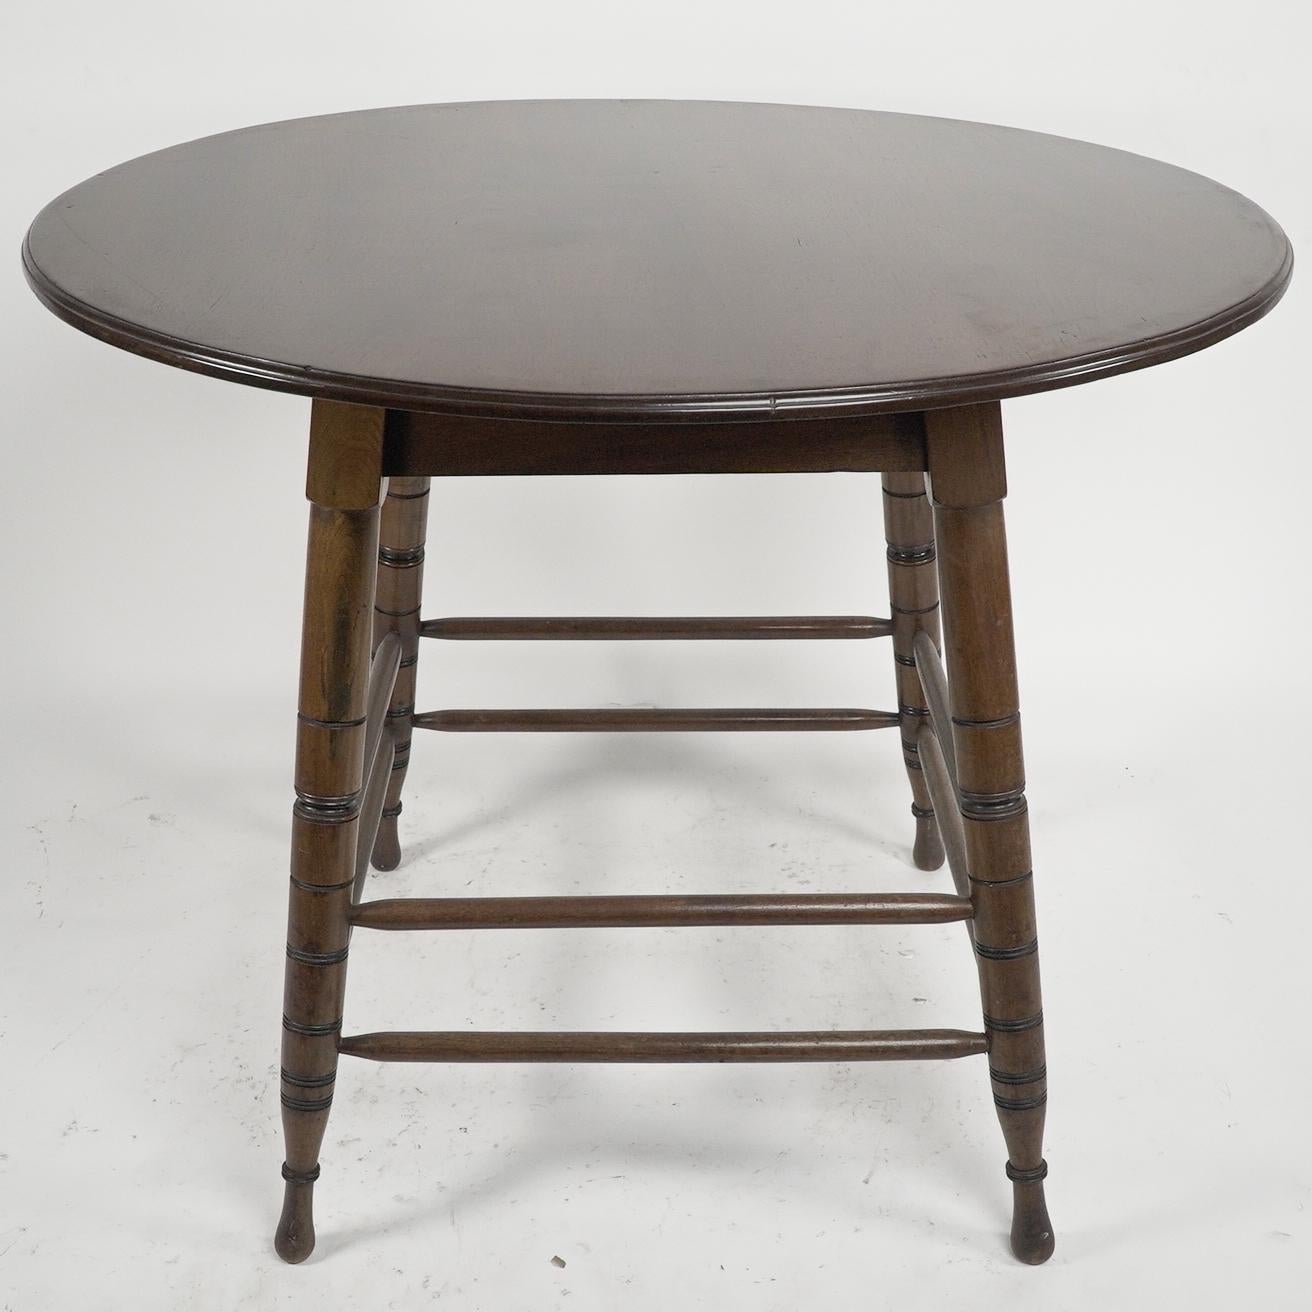 Collinson and Lock, attributed. An Aesthetic Movement Walnut centre table with incised circular details to the legs, united by double cross stretchers.